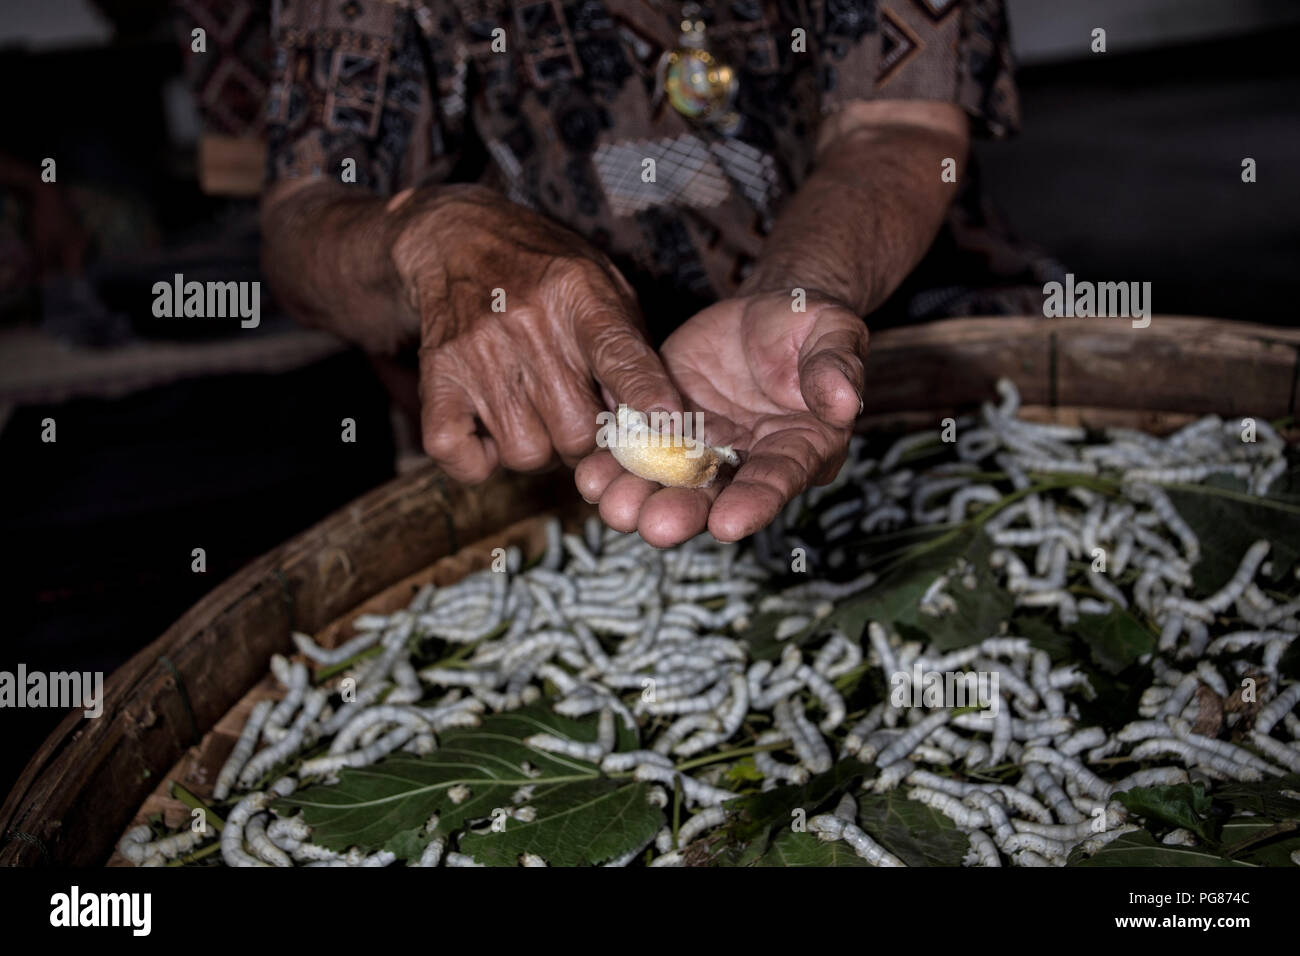 Silkworm production farm with a woman showing a close up of a silk worm cocoon and silkworms in the background Thailand Southeast Asia Stock Photo